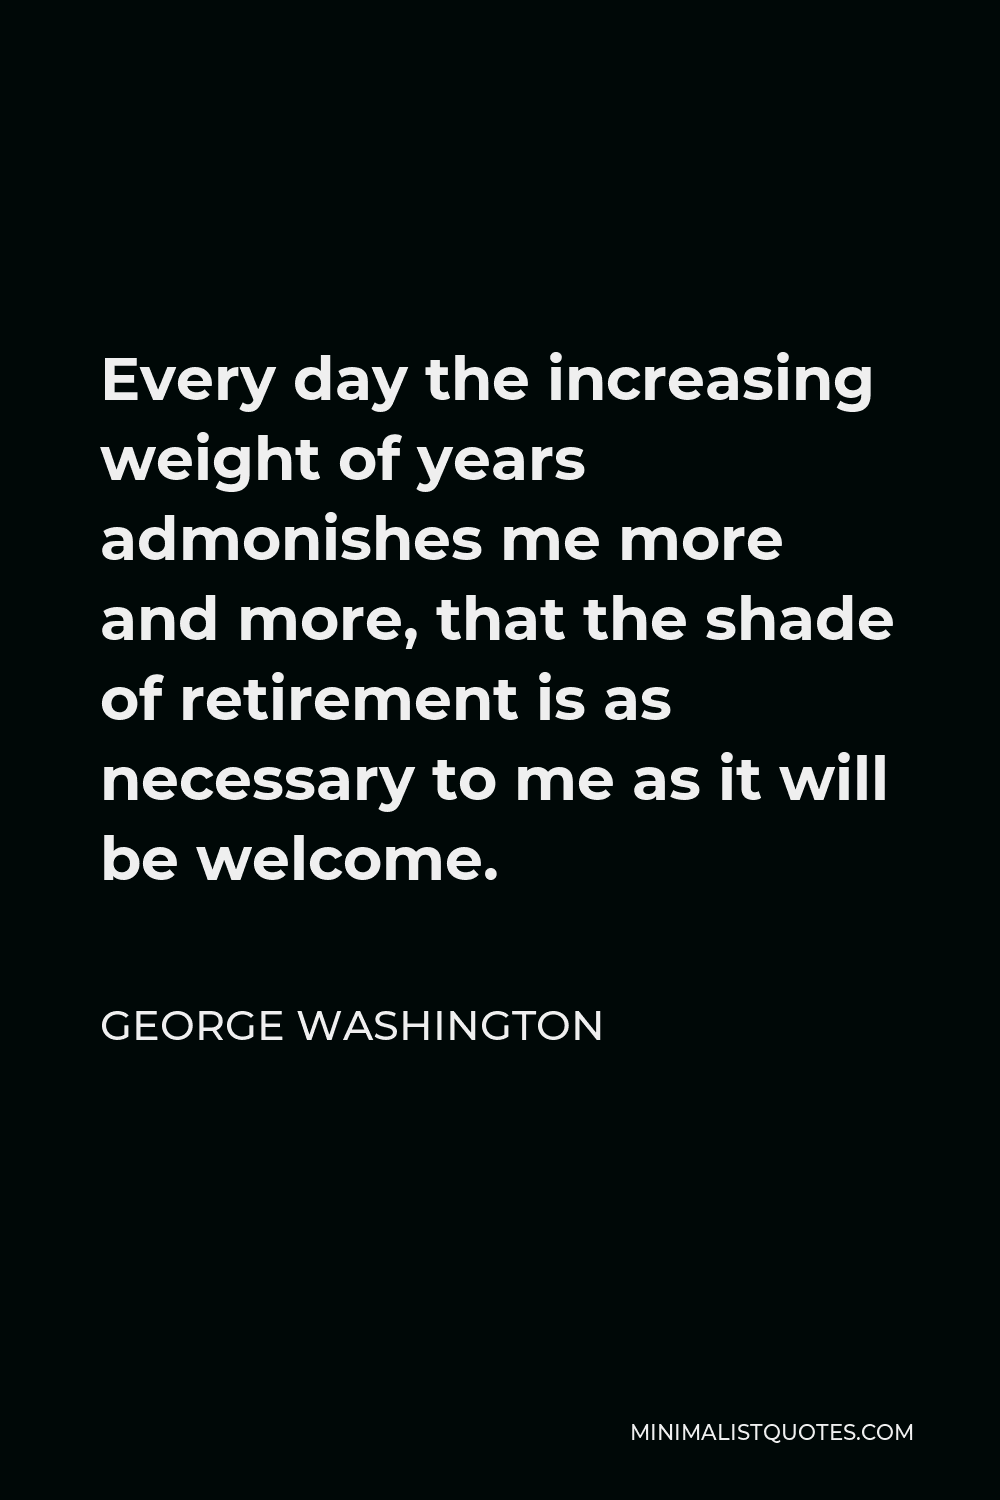 George Washington Quote - Every day the increasing weight of years admonishes me more and more, that the shade of retirement is as necessary to me as it will be welcome.